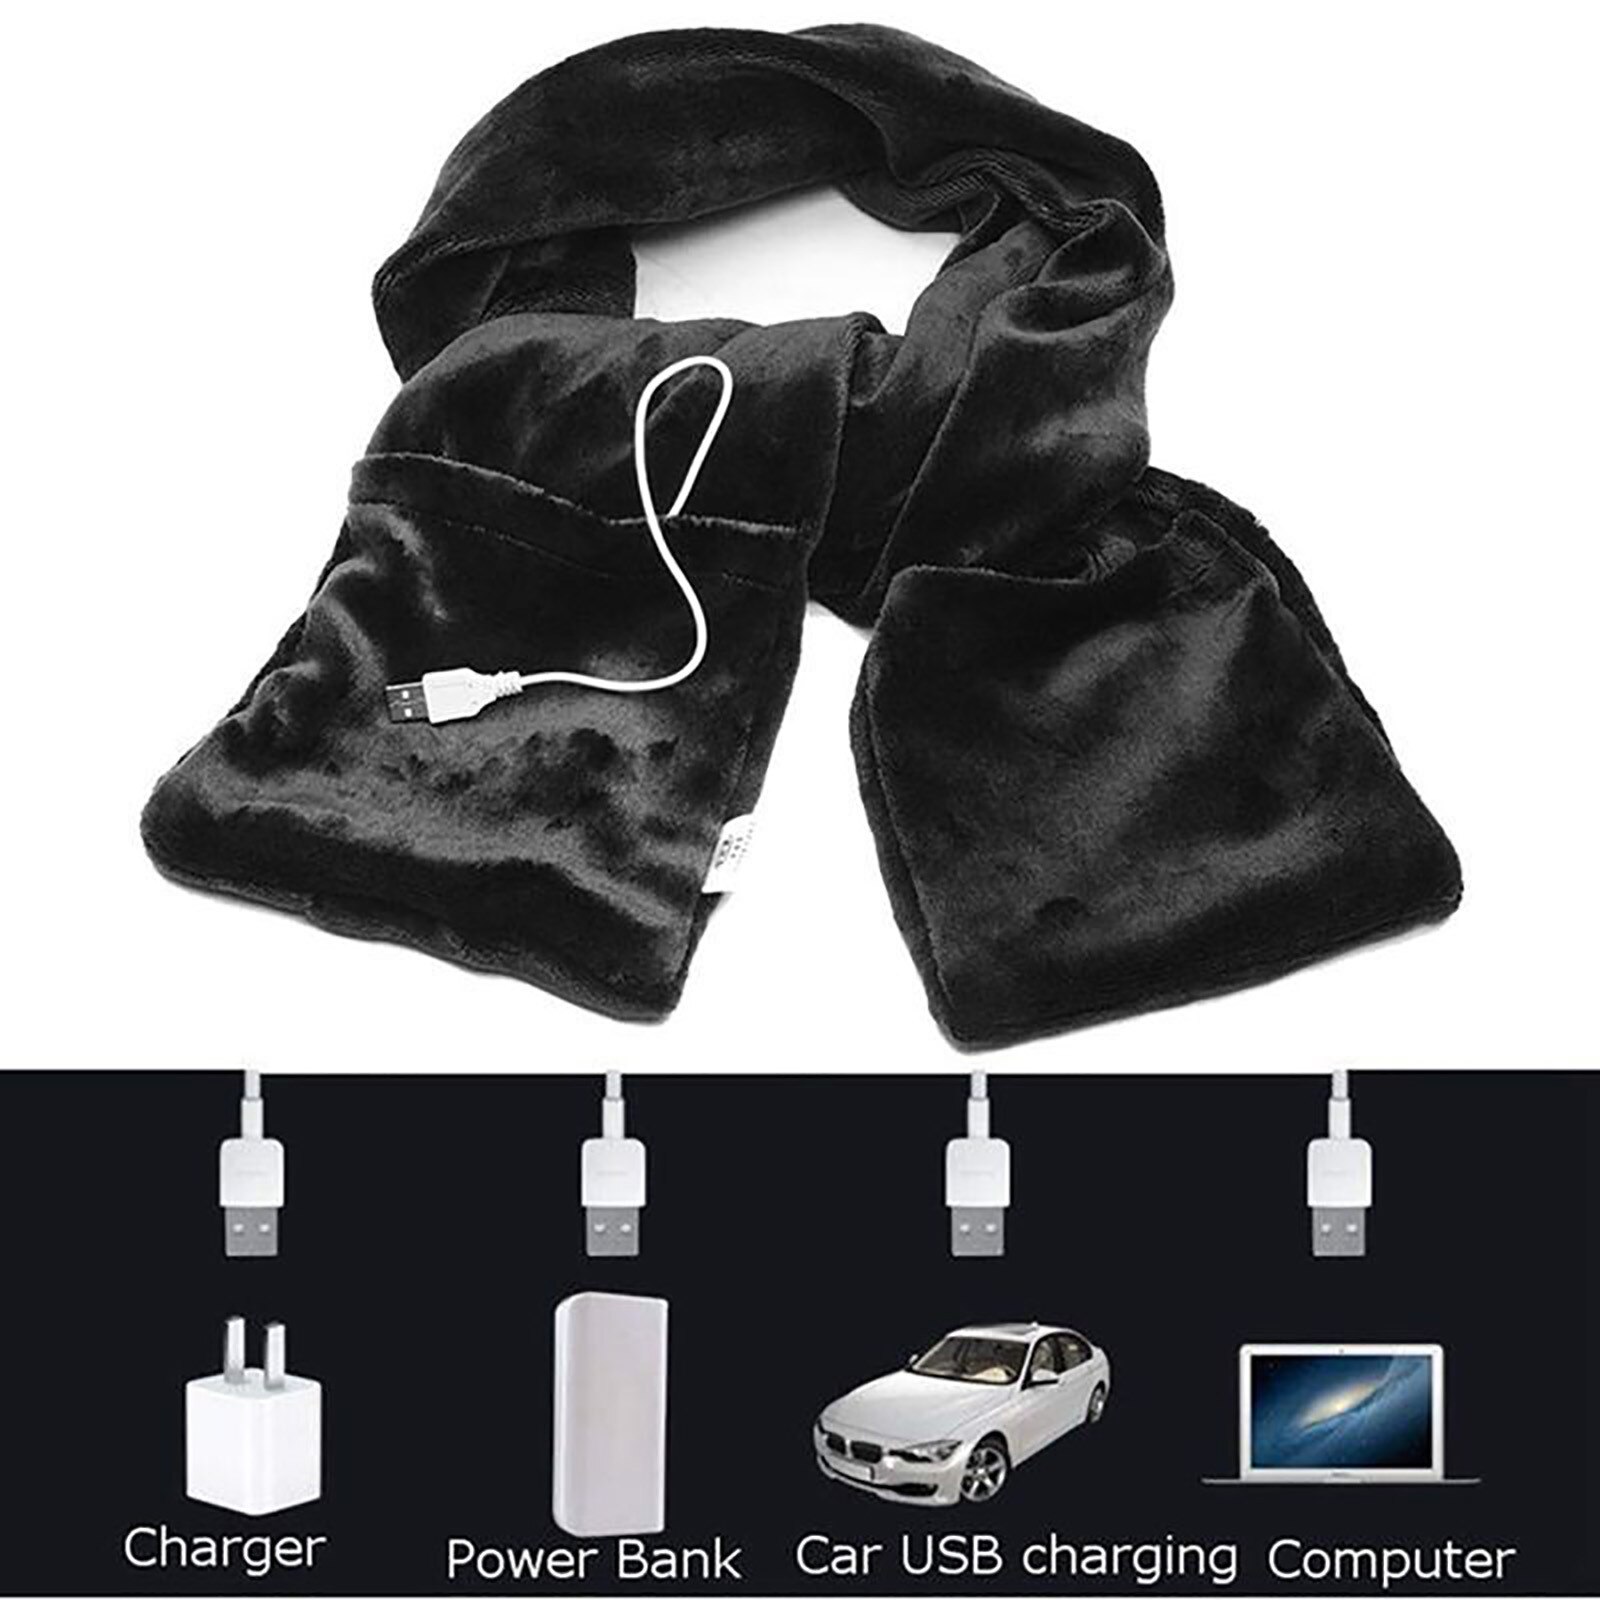 40-USB-chauffage-charpe-adulte-chauffage-ch-le-charpes-froid-hiver-chaud-enveloppes-femmes-solide-doux